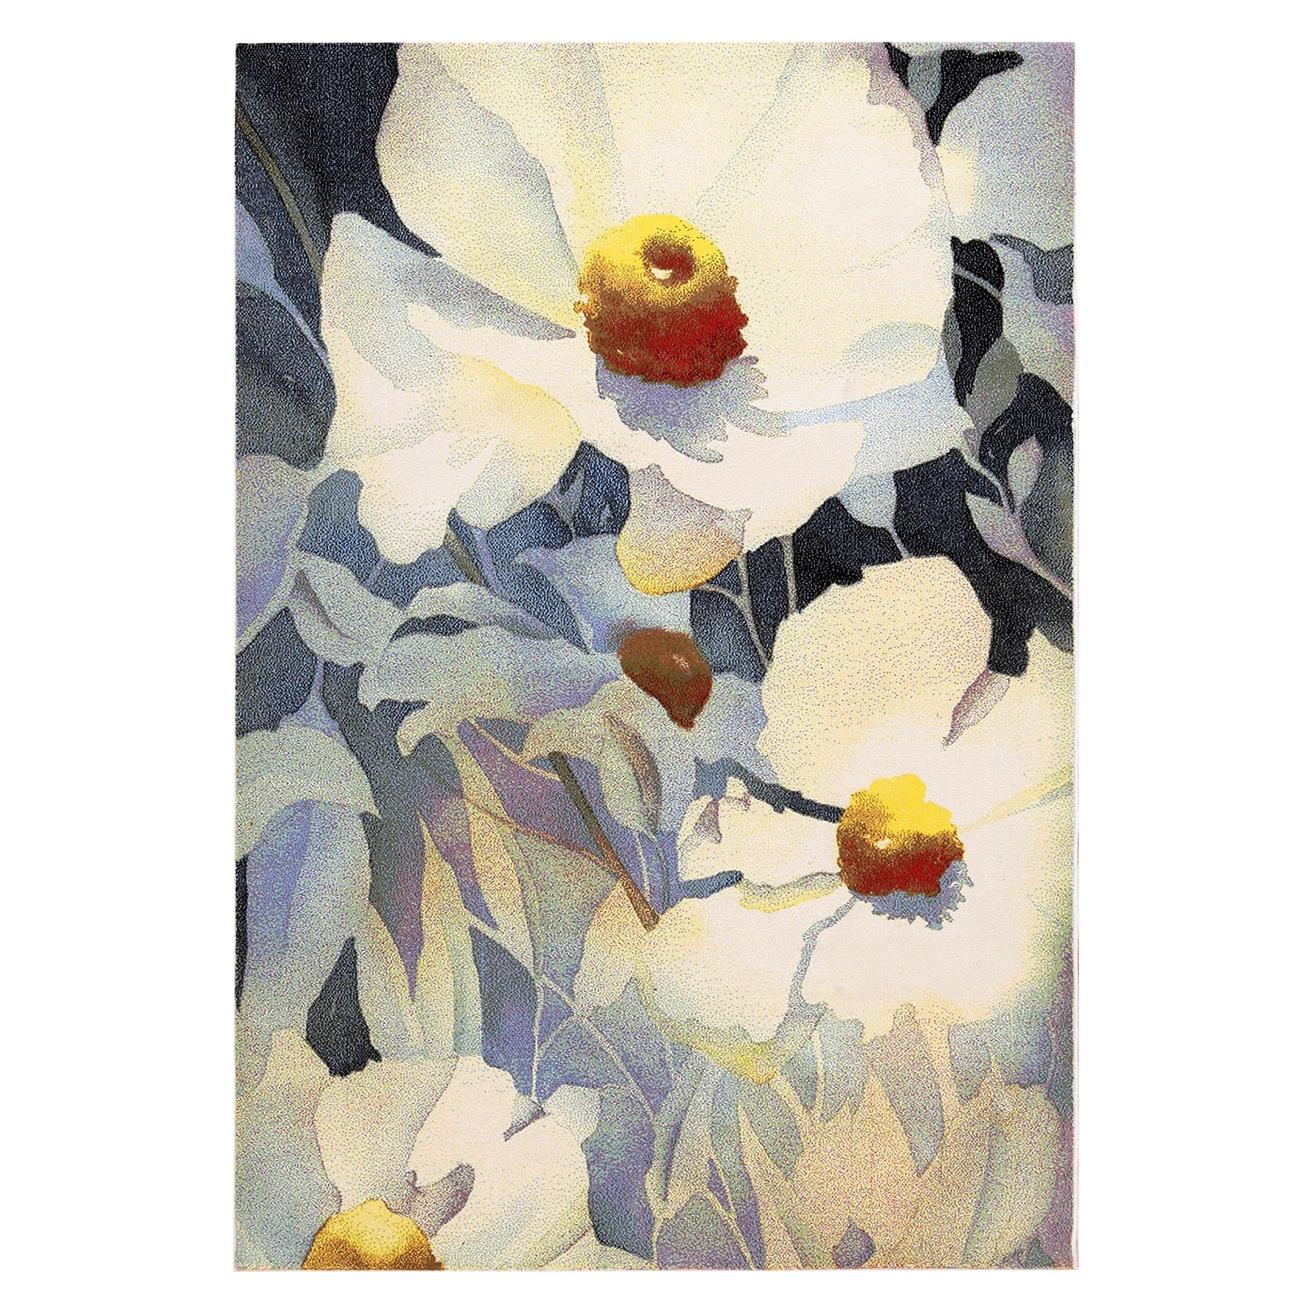 Vintage Georgia O’keeffe Art Rug from Scandinavia. Size: 5 ft 2 in x 7 ft 7 in